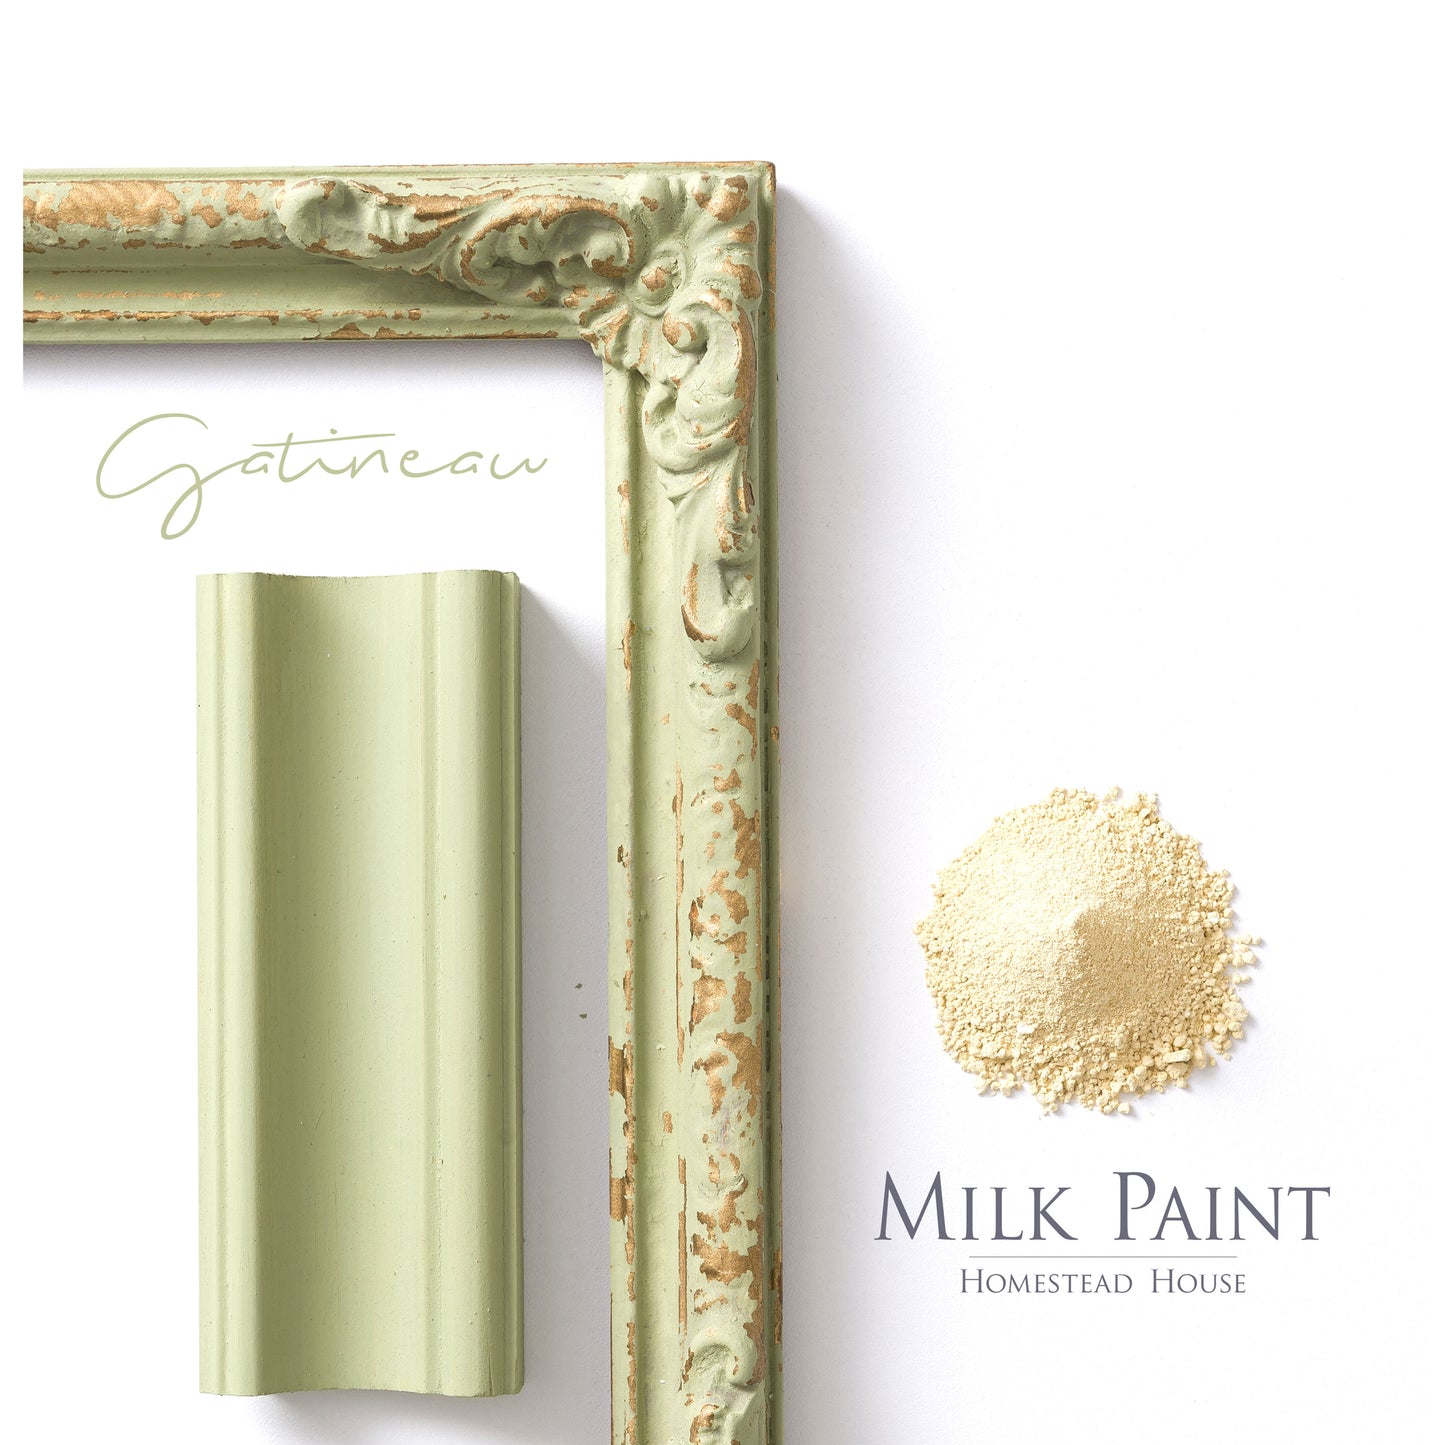 Milk Paint from Homestead House in Gatineaux, Our muted chartreuse. | homesteadhouse.ca